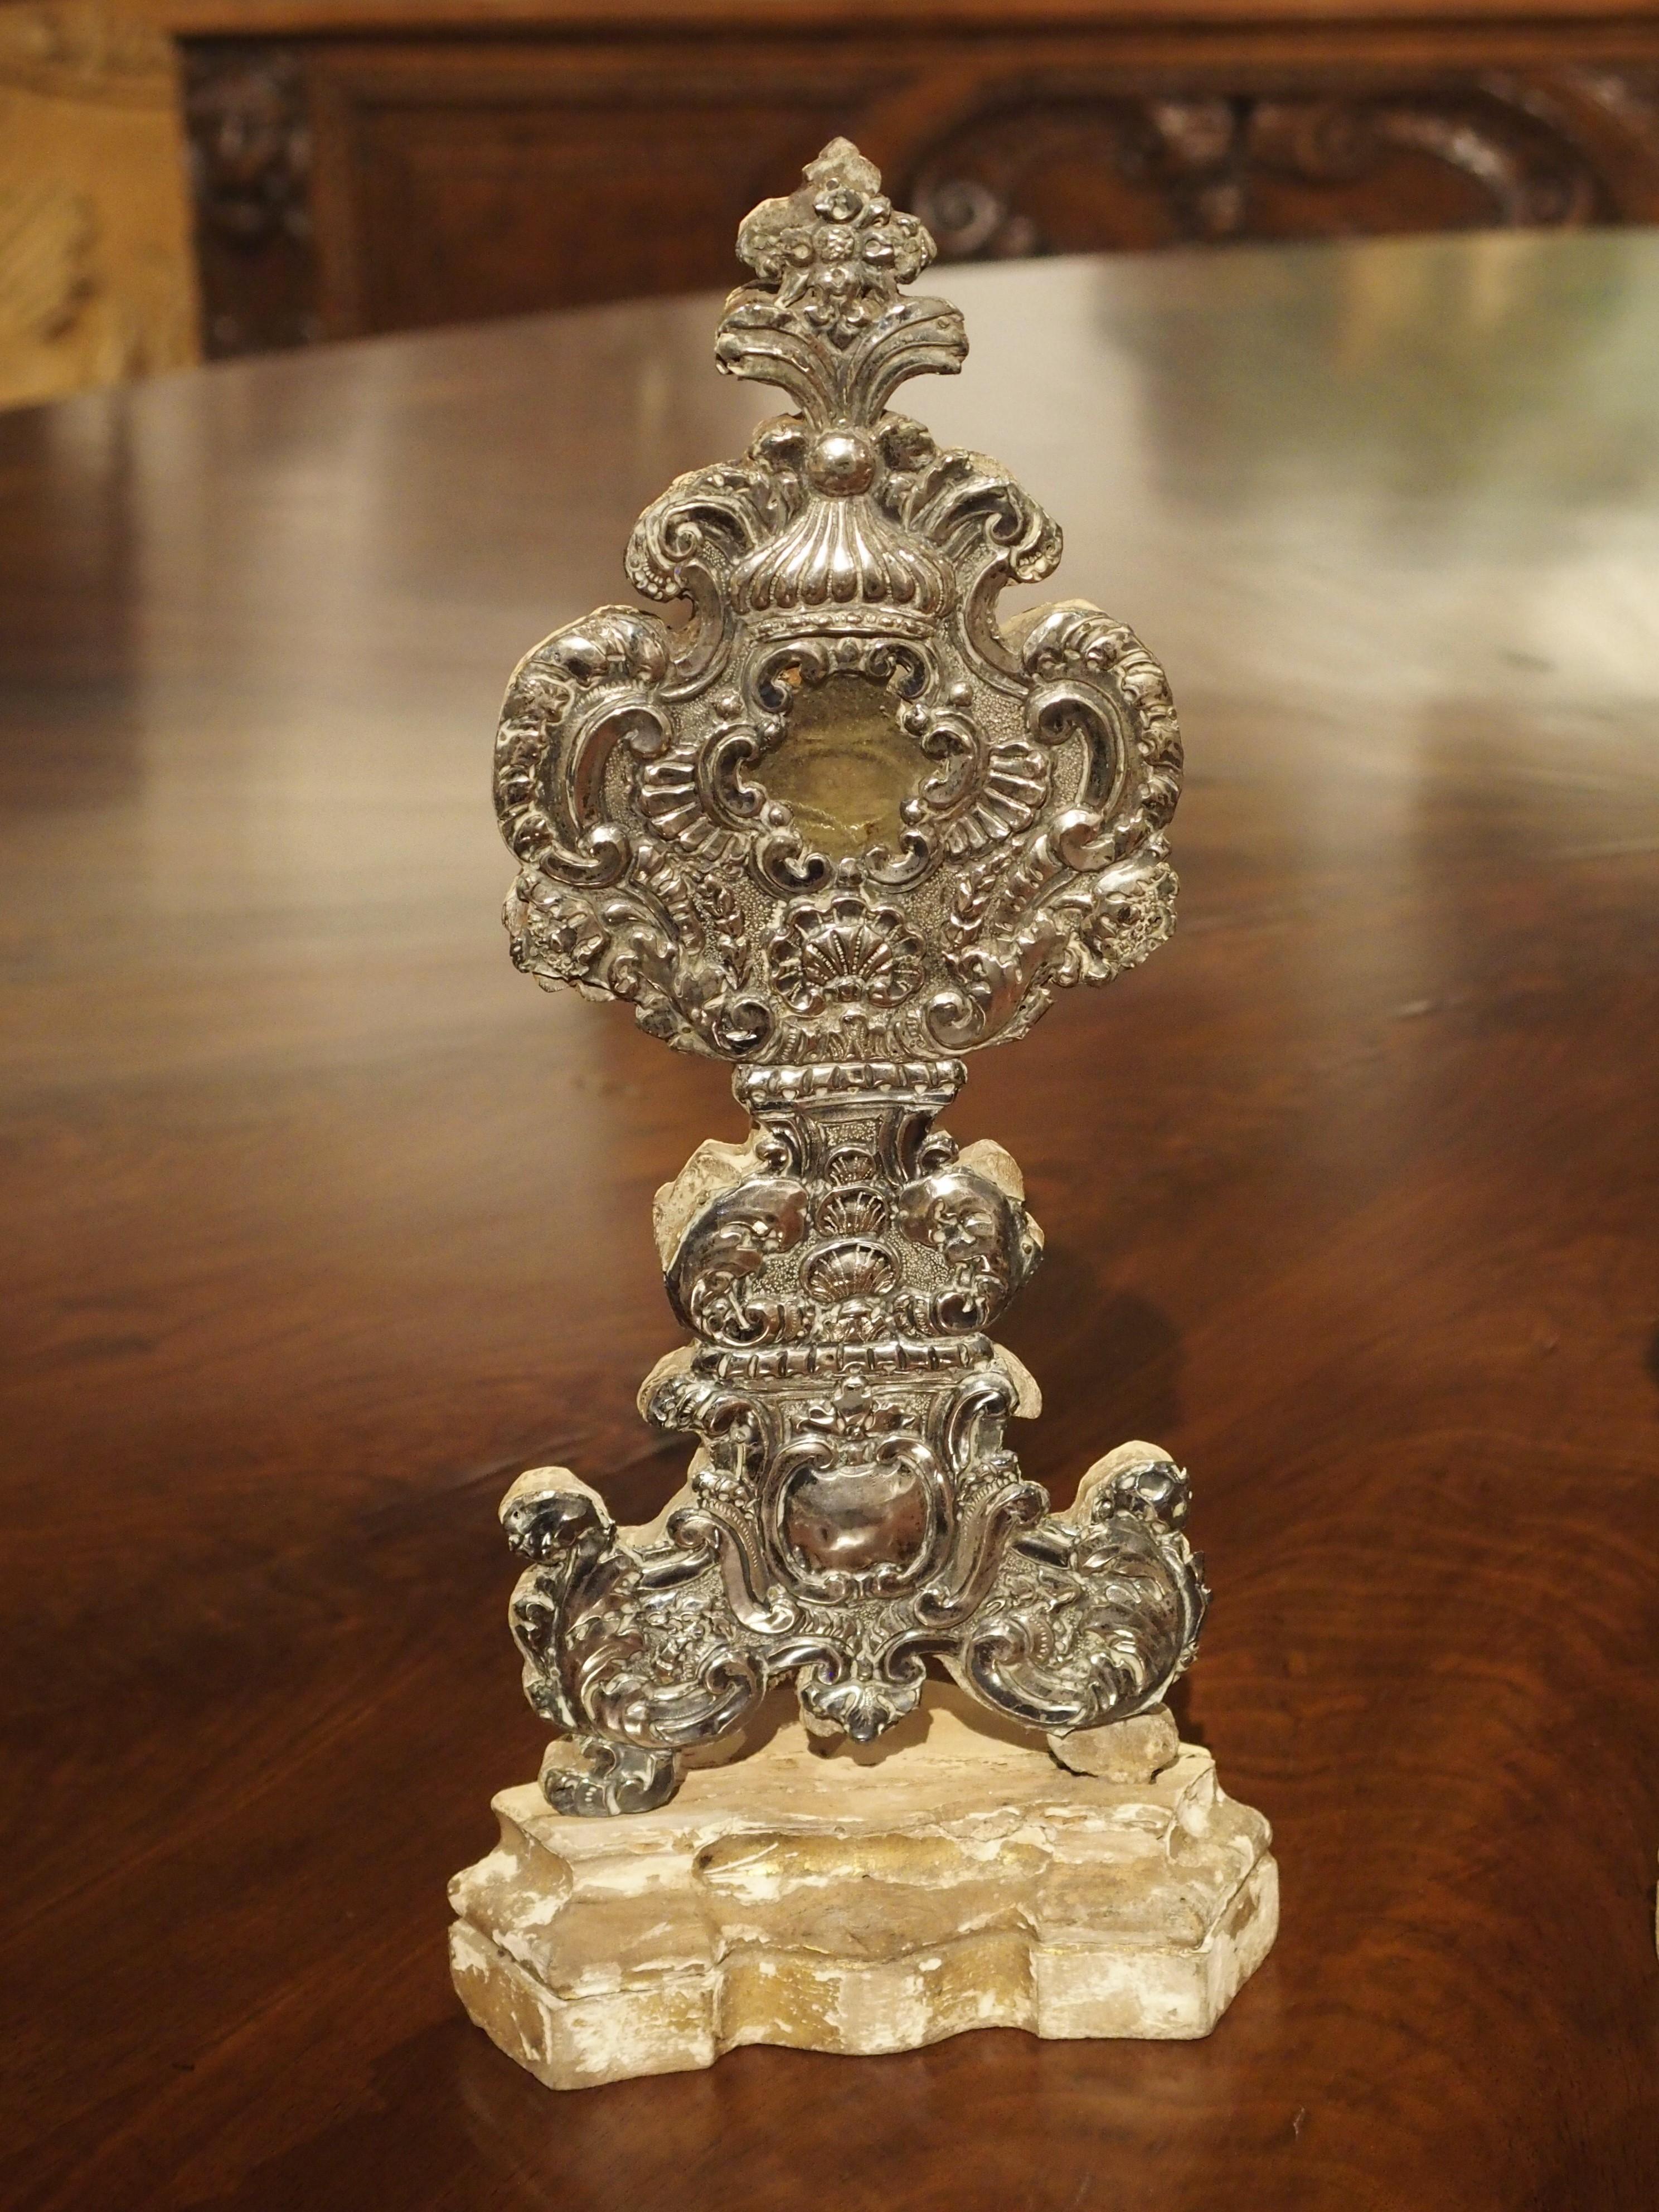 This pair of silvered wooden reliquaries are from France, circa 1750. The backs are still preserved by wax seals, indicating that the relics were never removed.

Each reliquary has an engraved piece of silver hammered onto the front of wooden